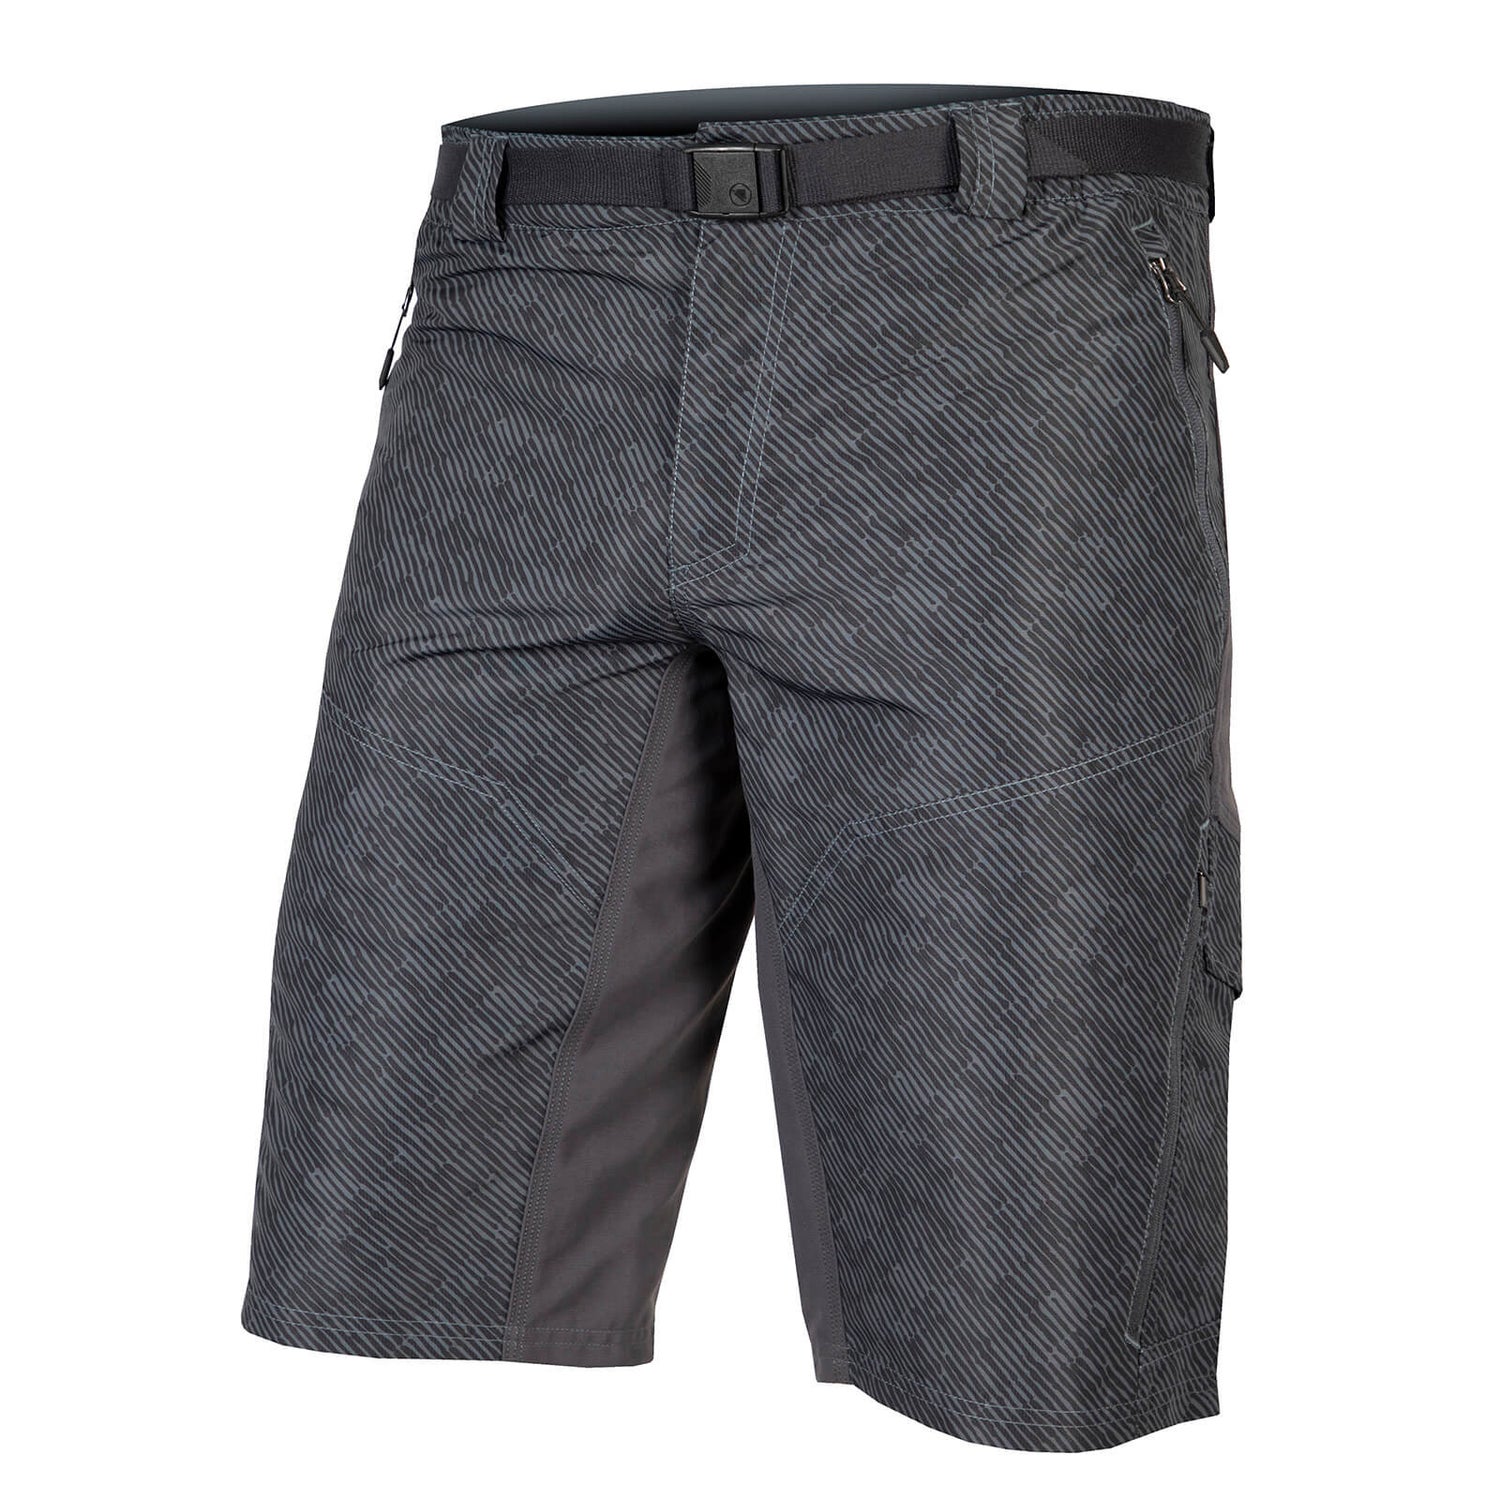 Hummvee Short with Liner - Anthracite - XXL